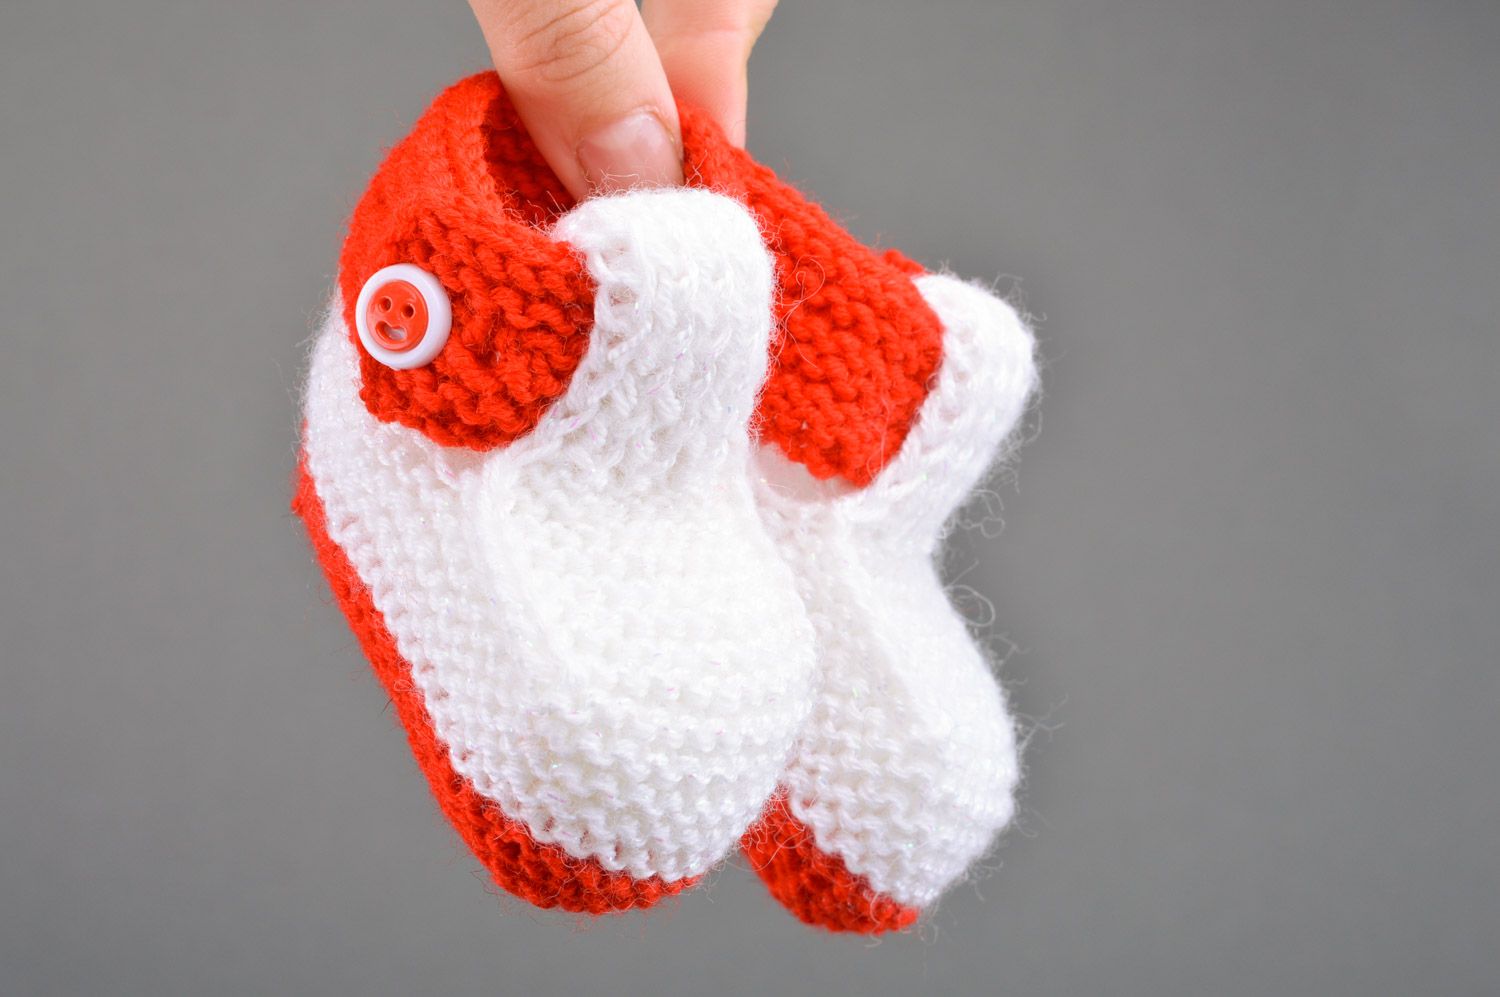 Red and white handmade knitted half-woolen baby booties with buttons photo 3